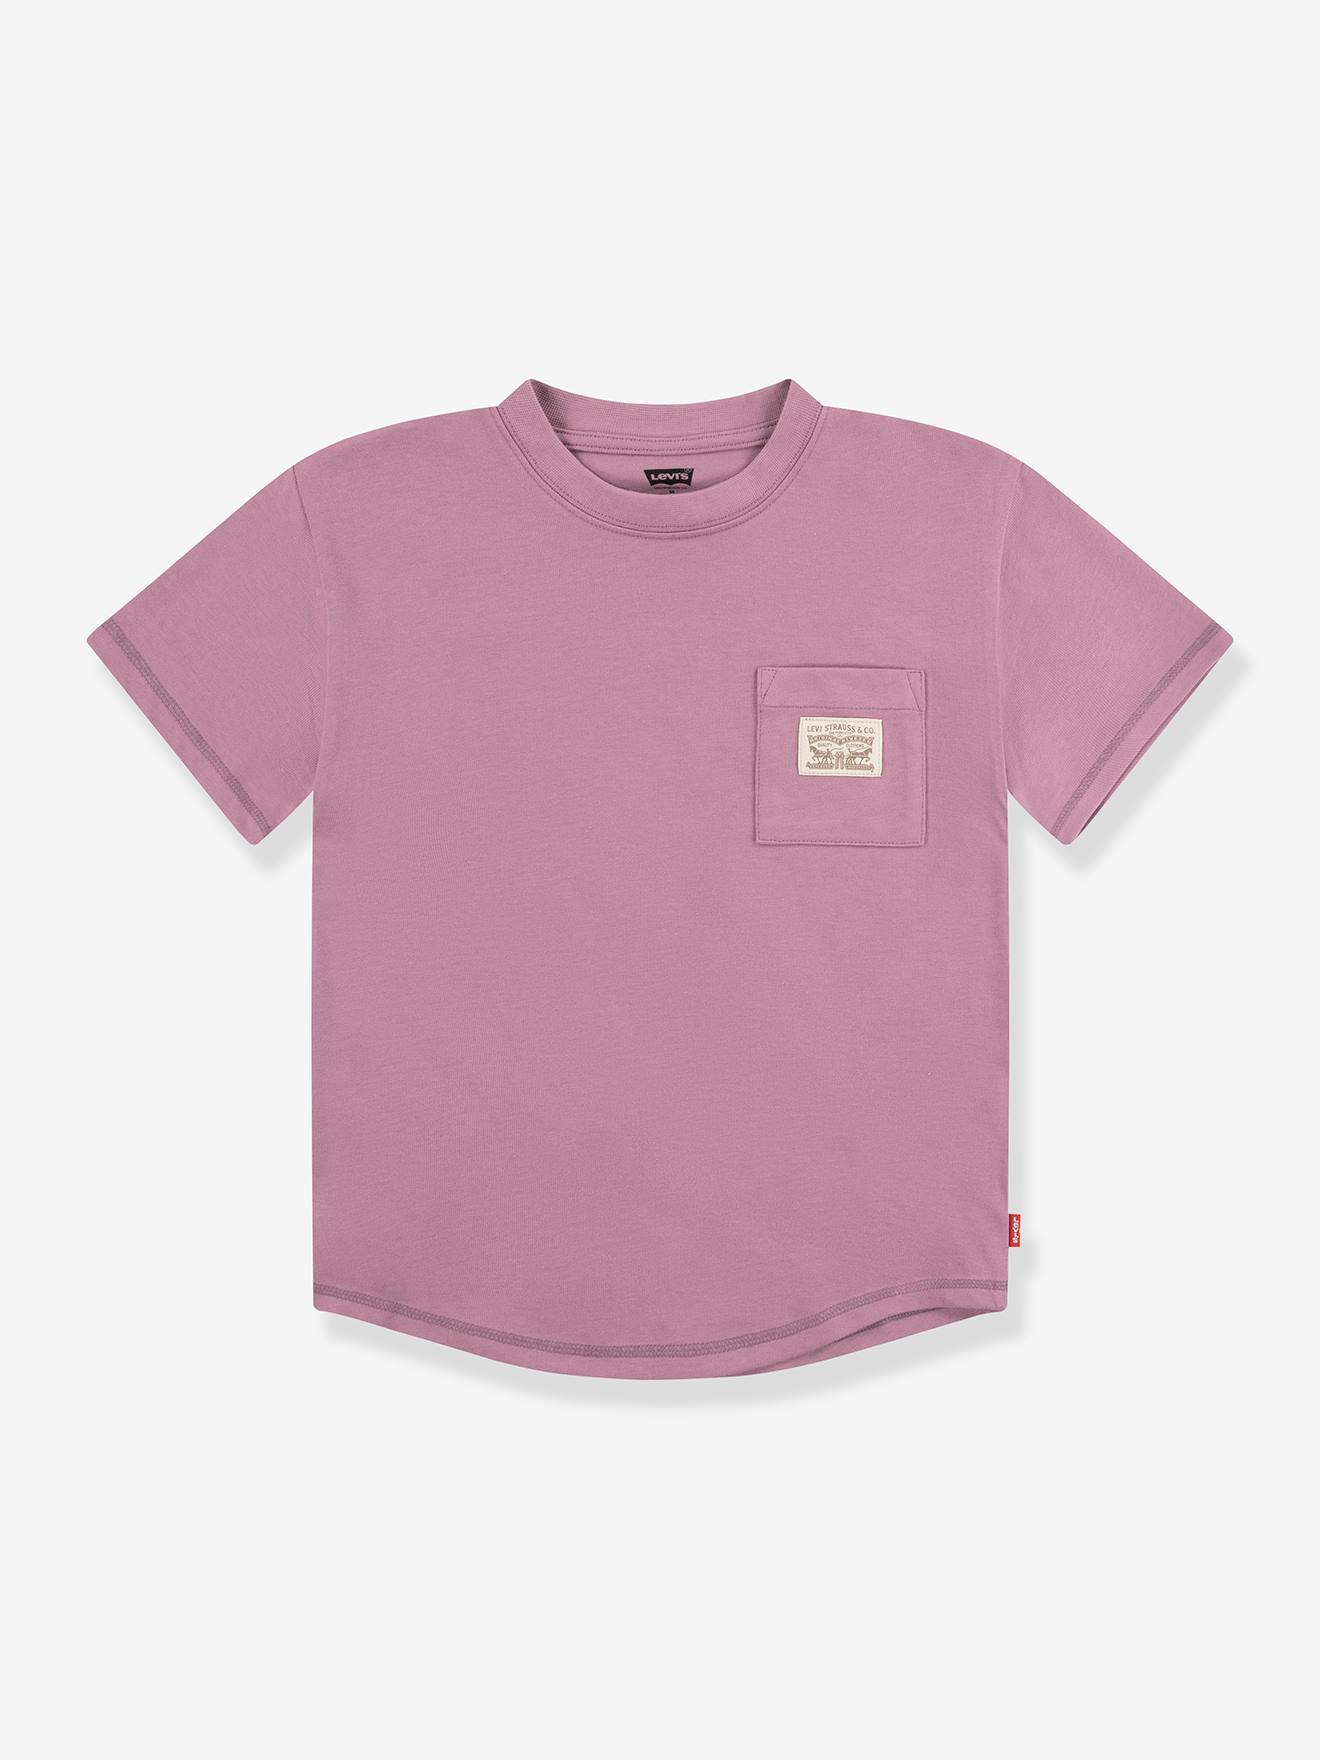 T-Shirt with Pocket by Levi’s(r) for Boys lavender